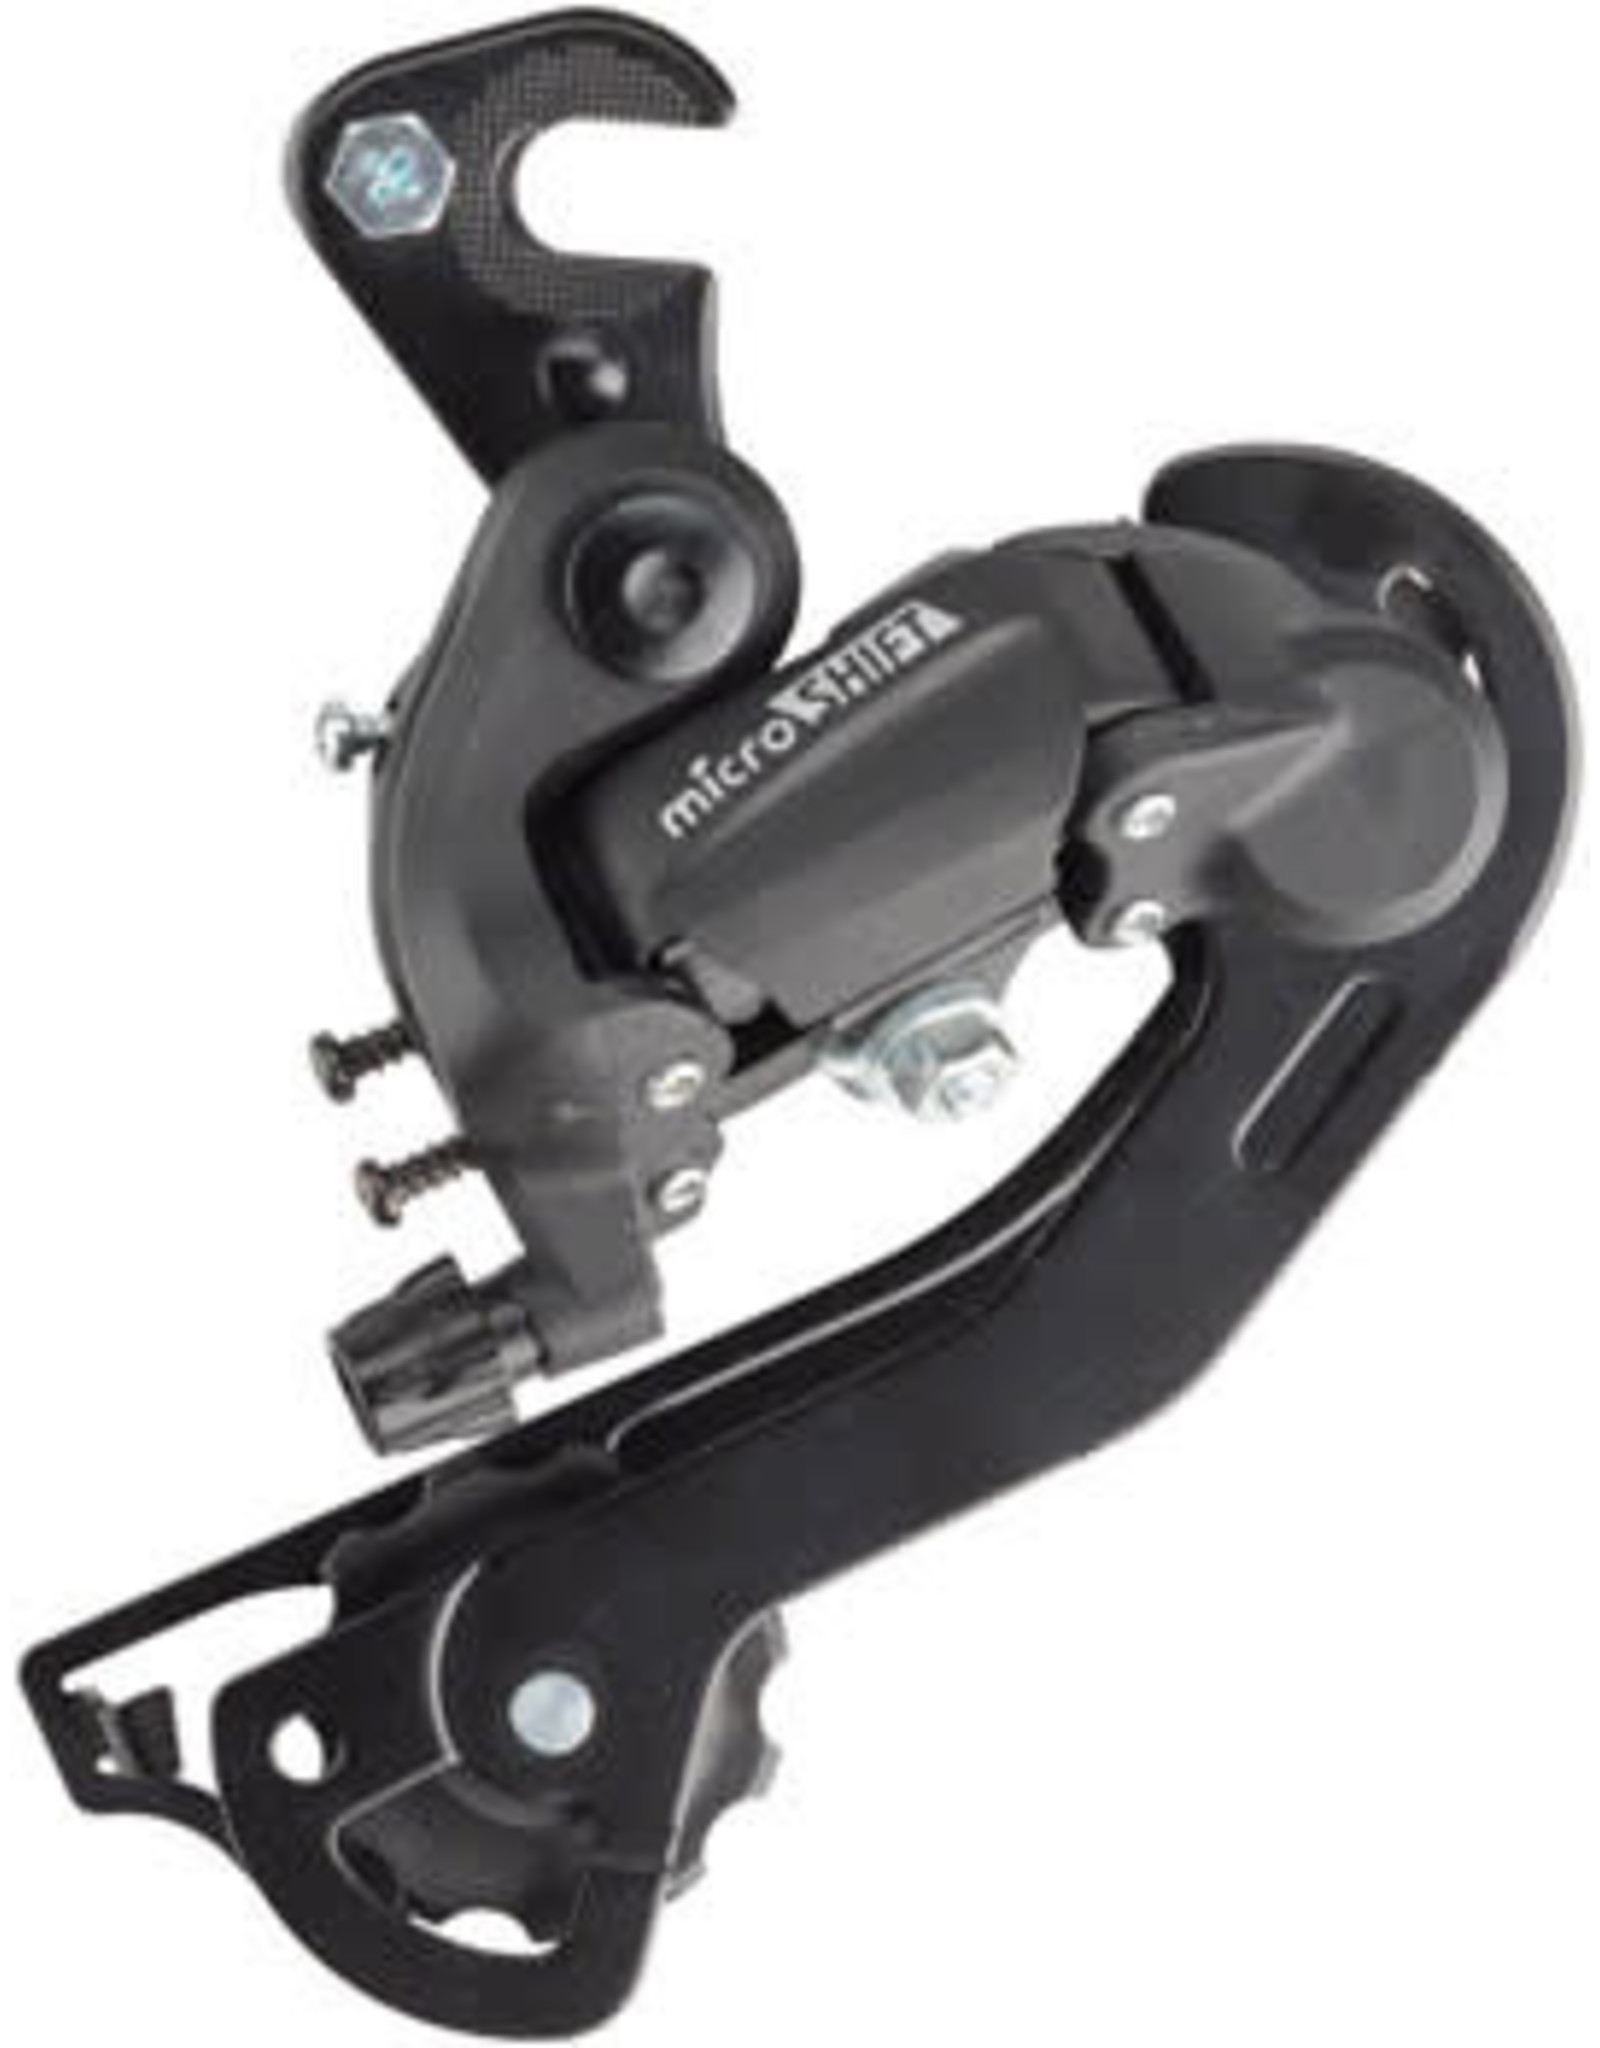 MicroShift microSHIFT M21 Rear Derailleur - 6,7 Speed, Long Cage, Dropout Claw Hanger, Black